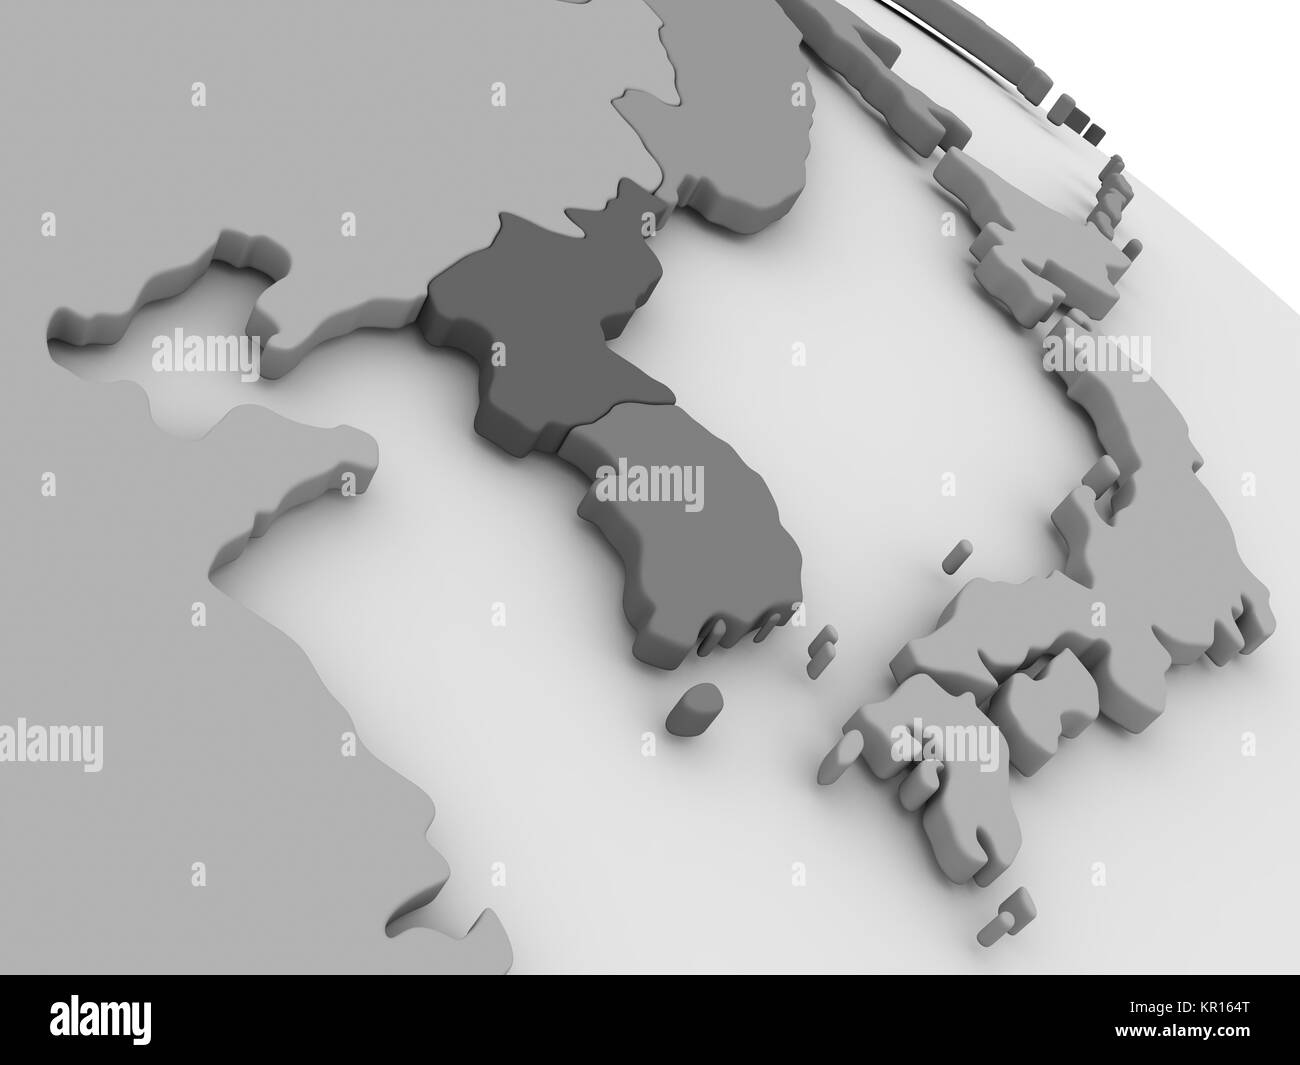 South Korean and North Korea on grey 3D map Stock Photo